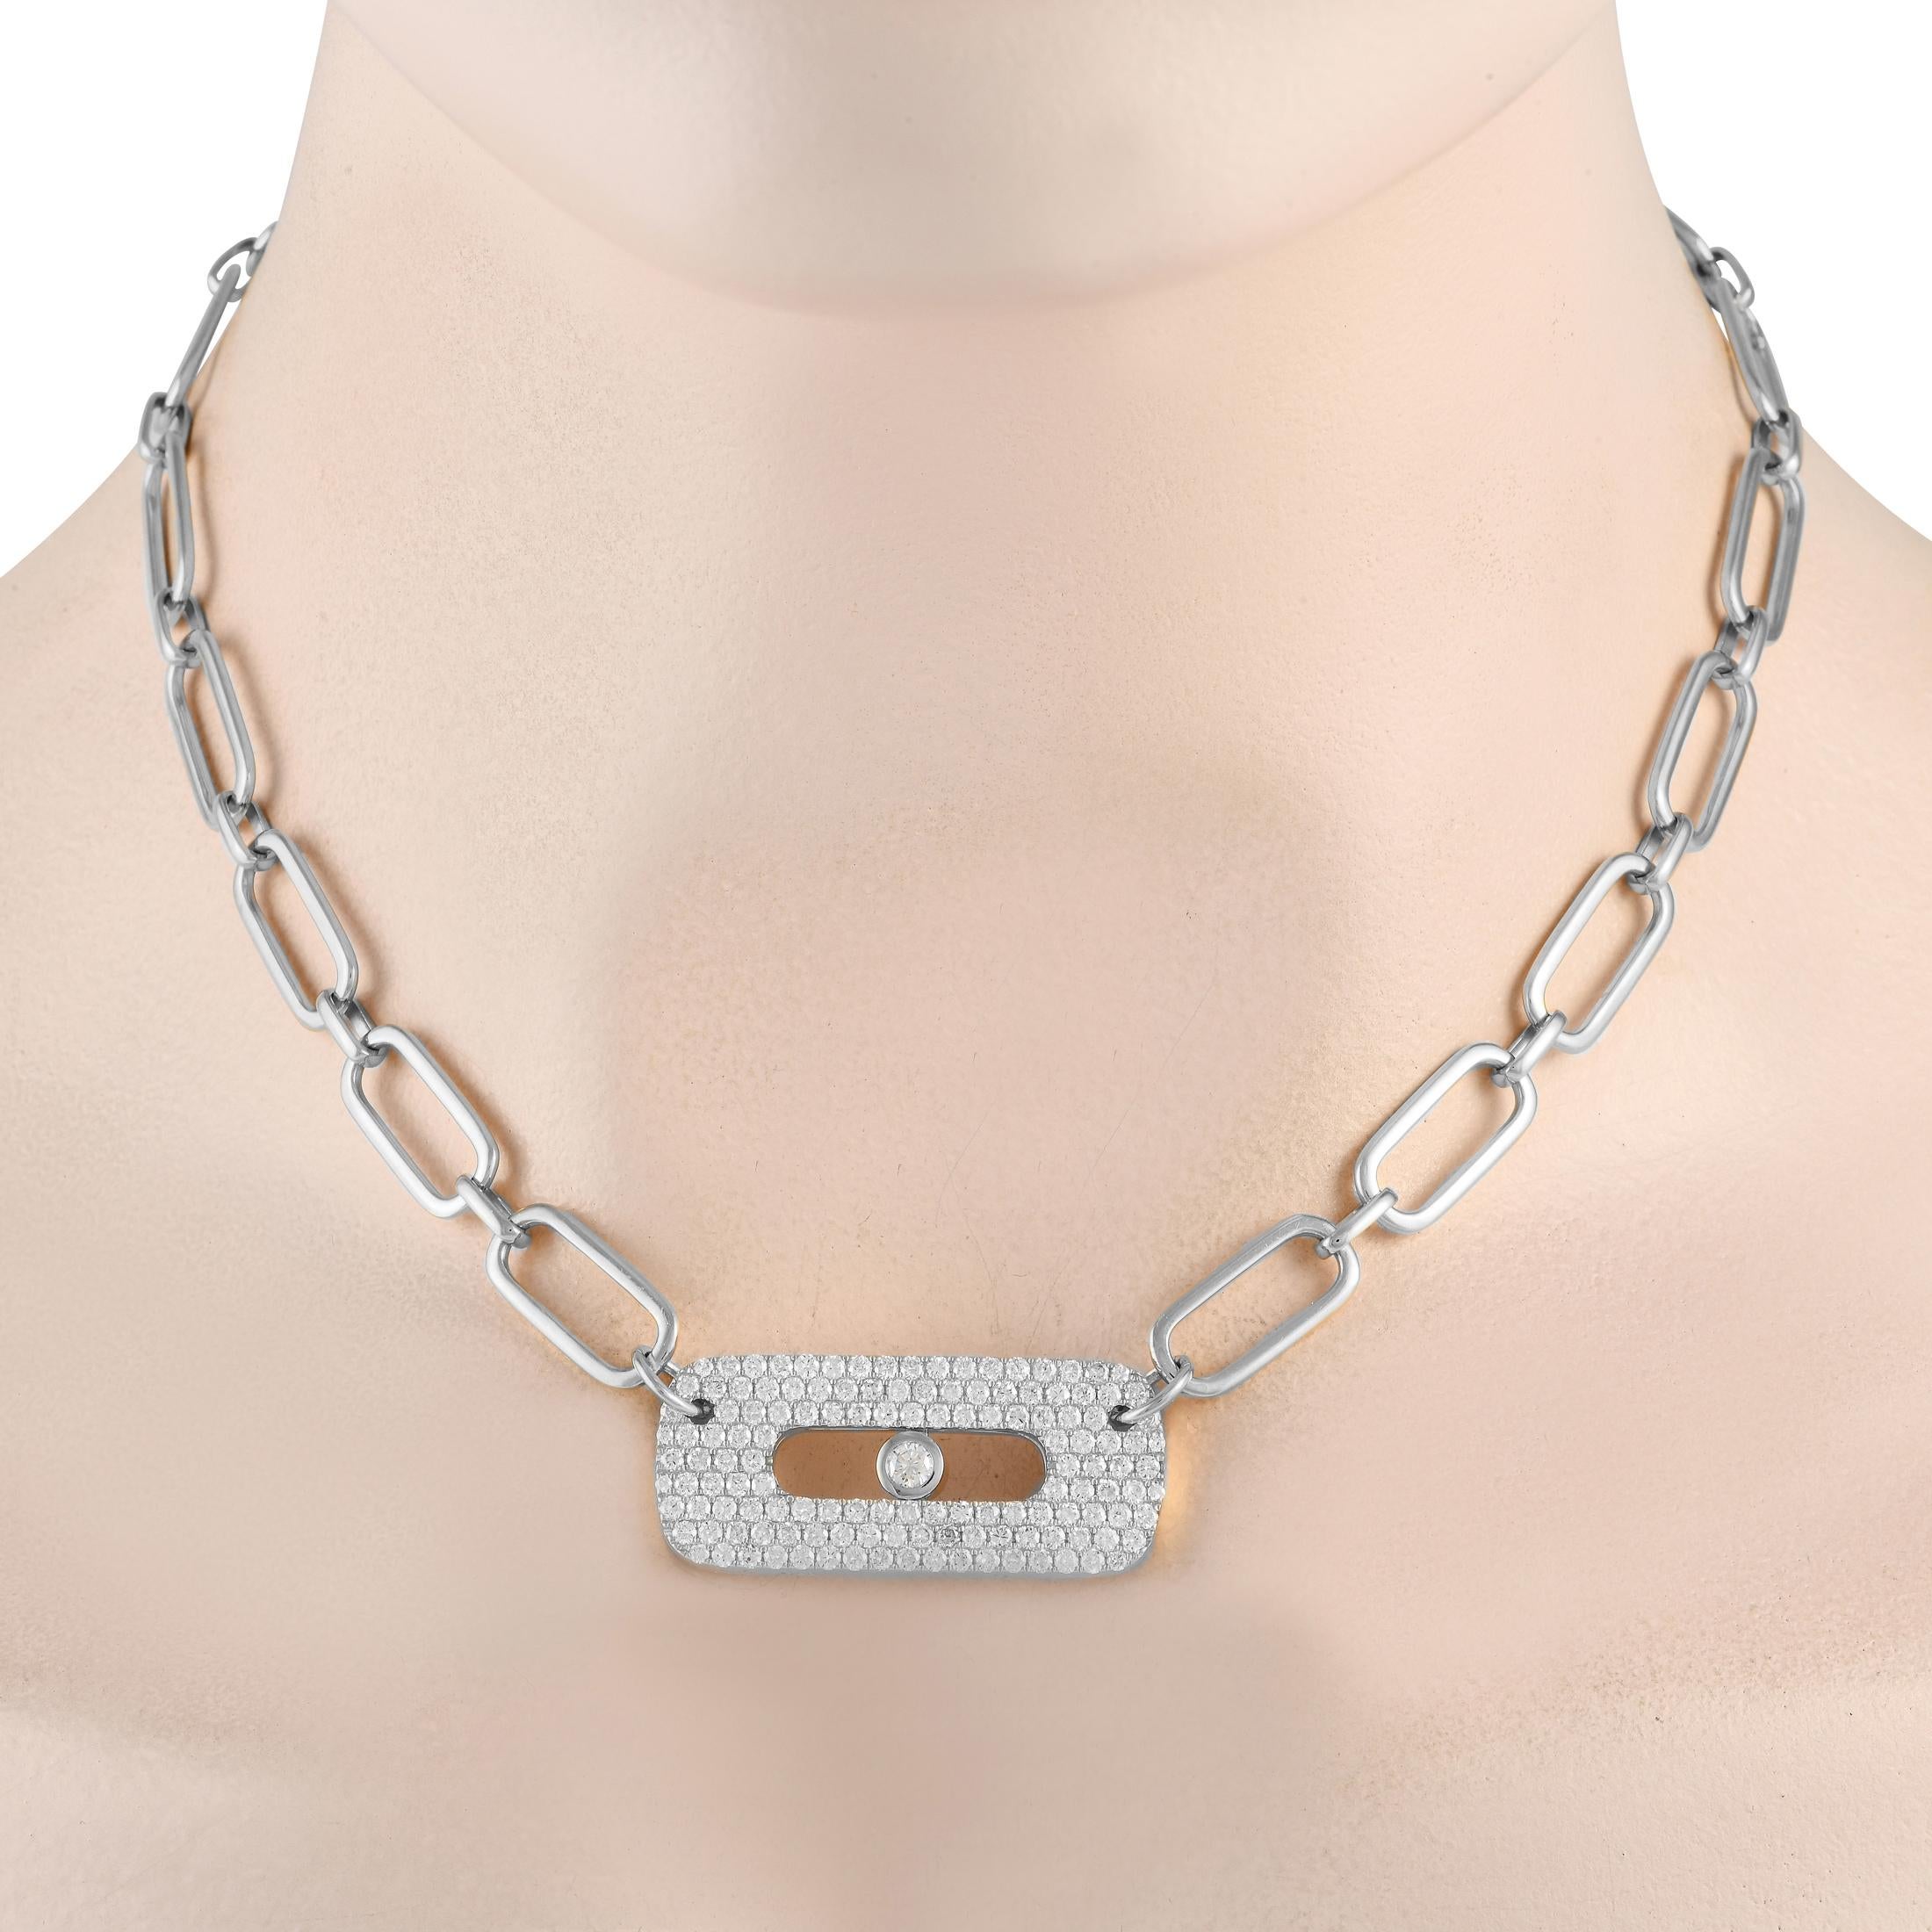 This unique necklace features a decidedly modern aesthetic. Positioned at the center of a bold 18K White Gold chain measuring 16” long, you’ll find a sleek pendant that comes to life thanks to round-cut diamonds with a total weight of 3.0 carats.